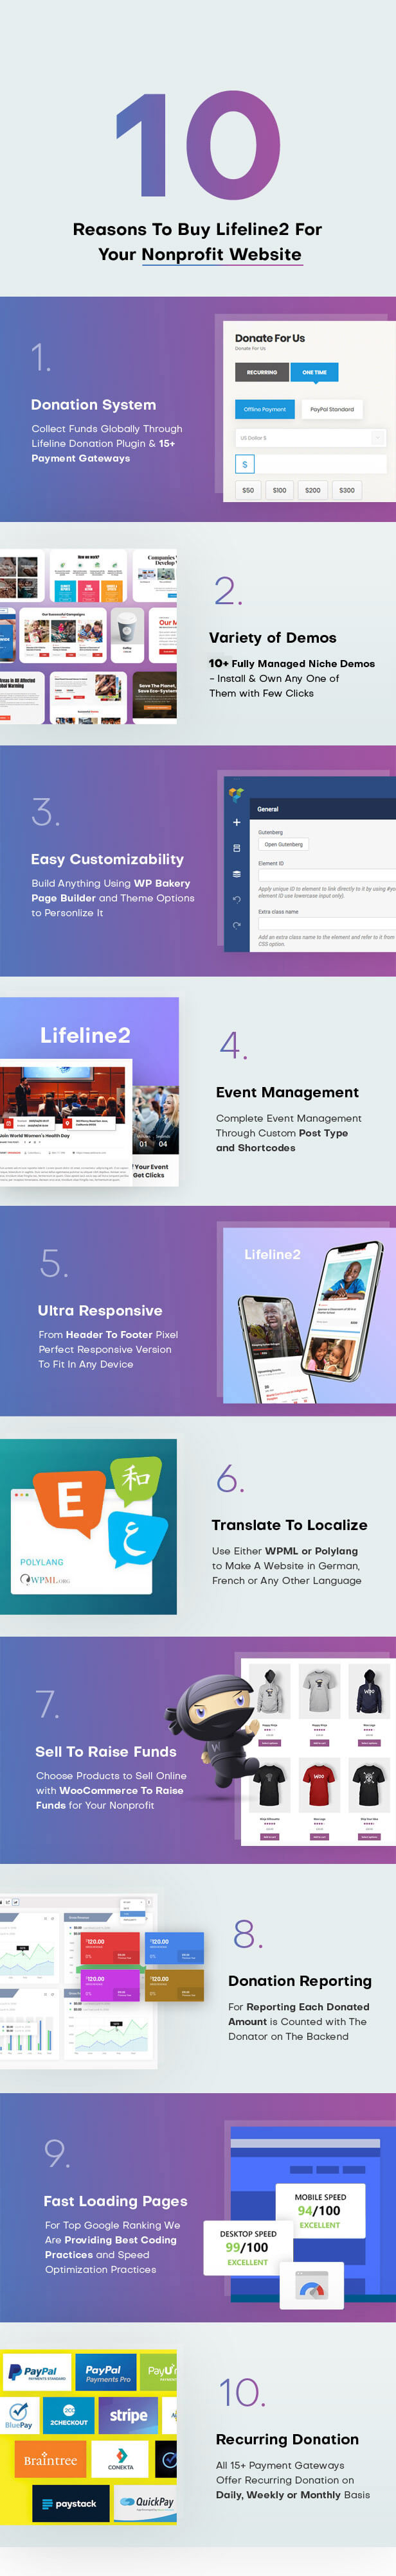 Lifeline 2 - An Ultimate Nonprofit WordPress Theme for Charity, Fundraising and NGO Organizations - 4